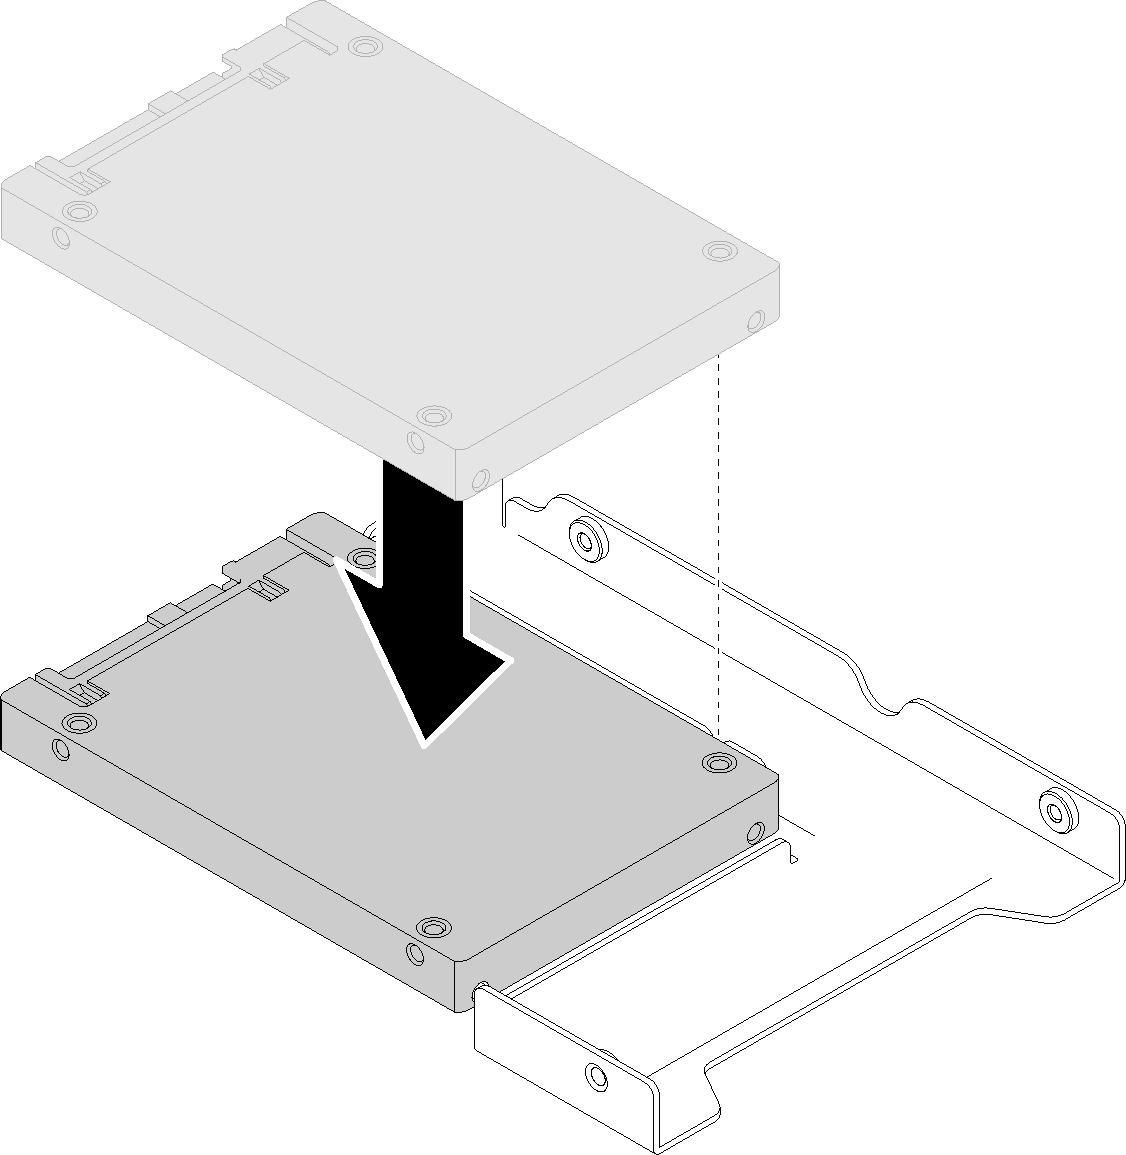 Positioning the 2.5-inch SSD into the drive adapter